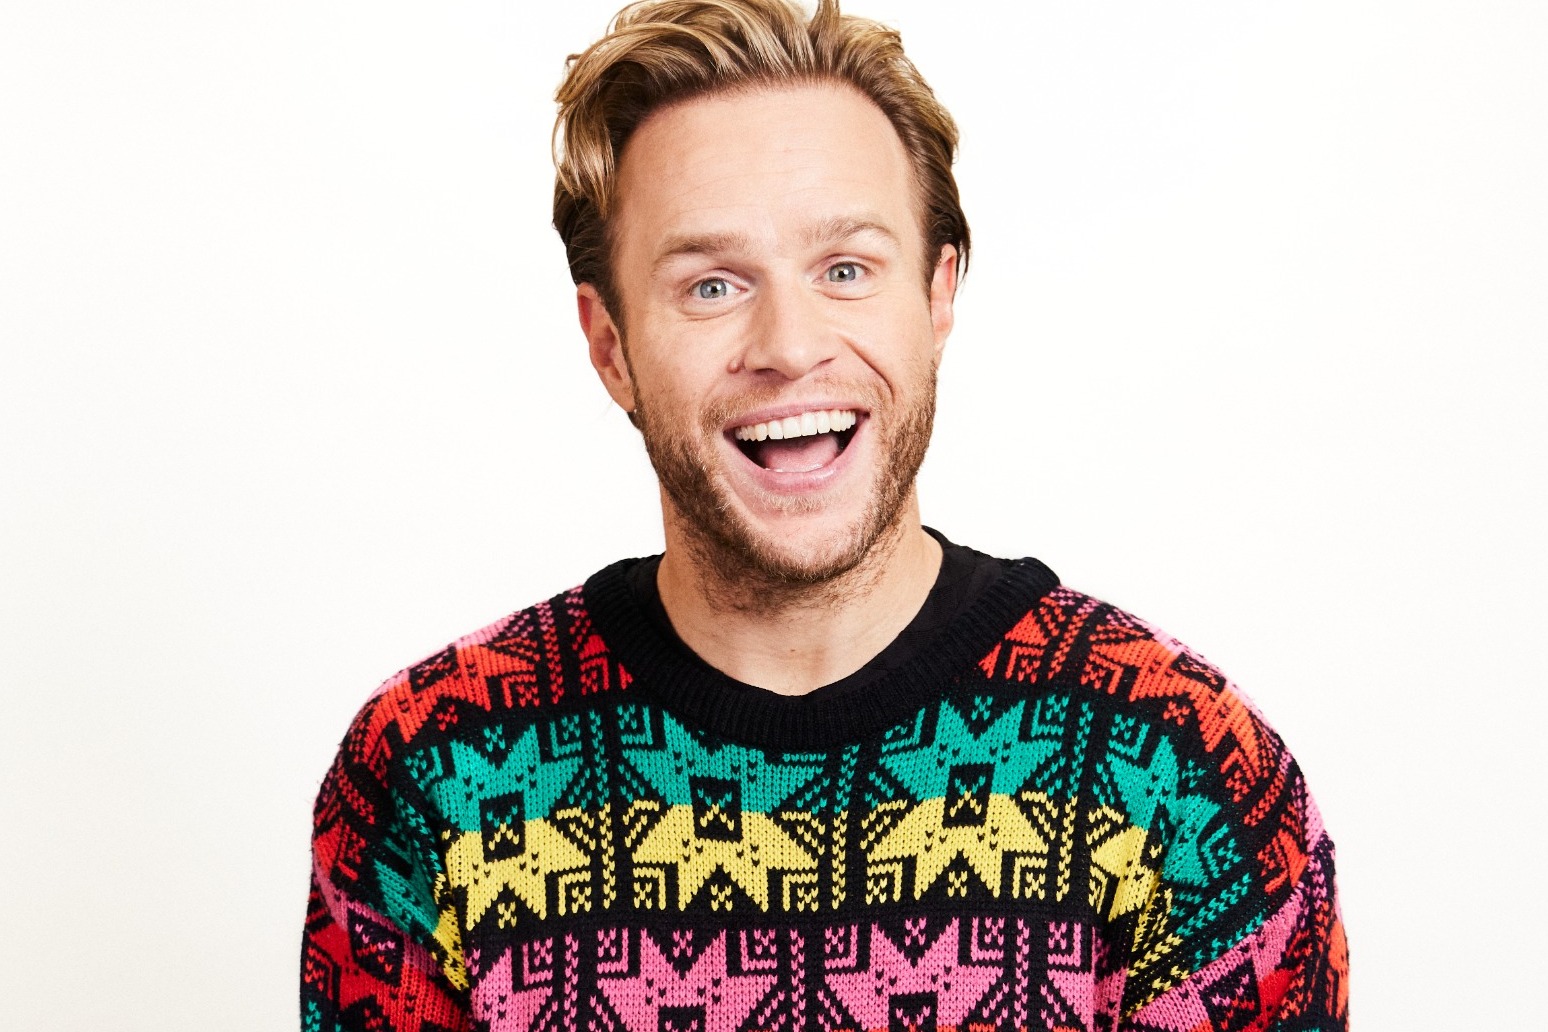 Olly Murs reads emotional passage Caroline Flack wrote about him before death 